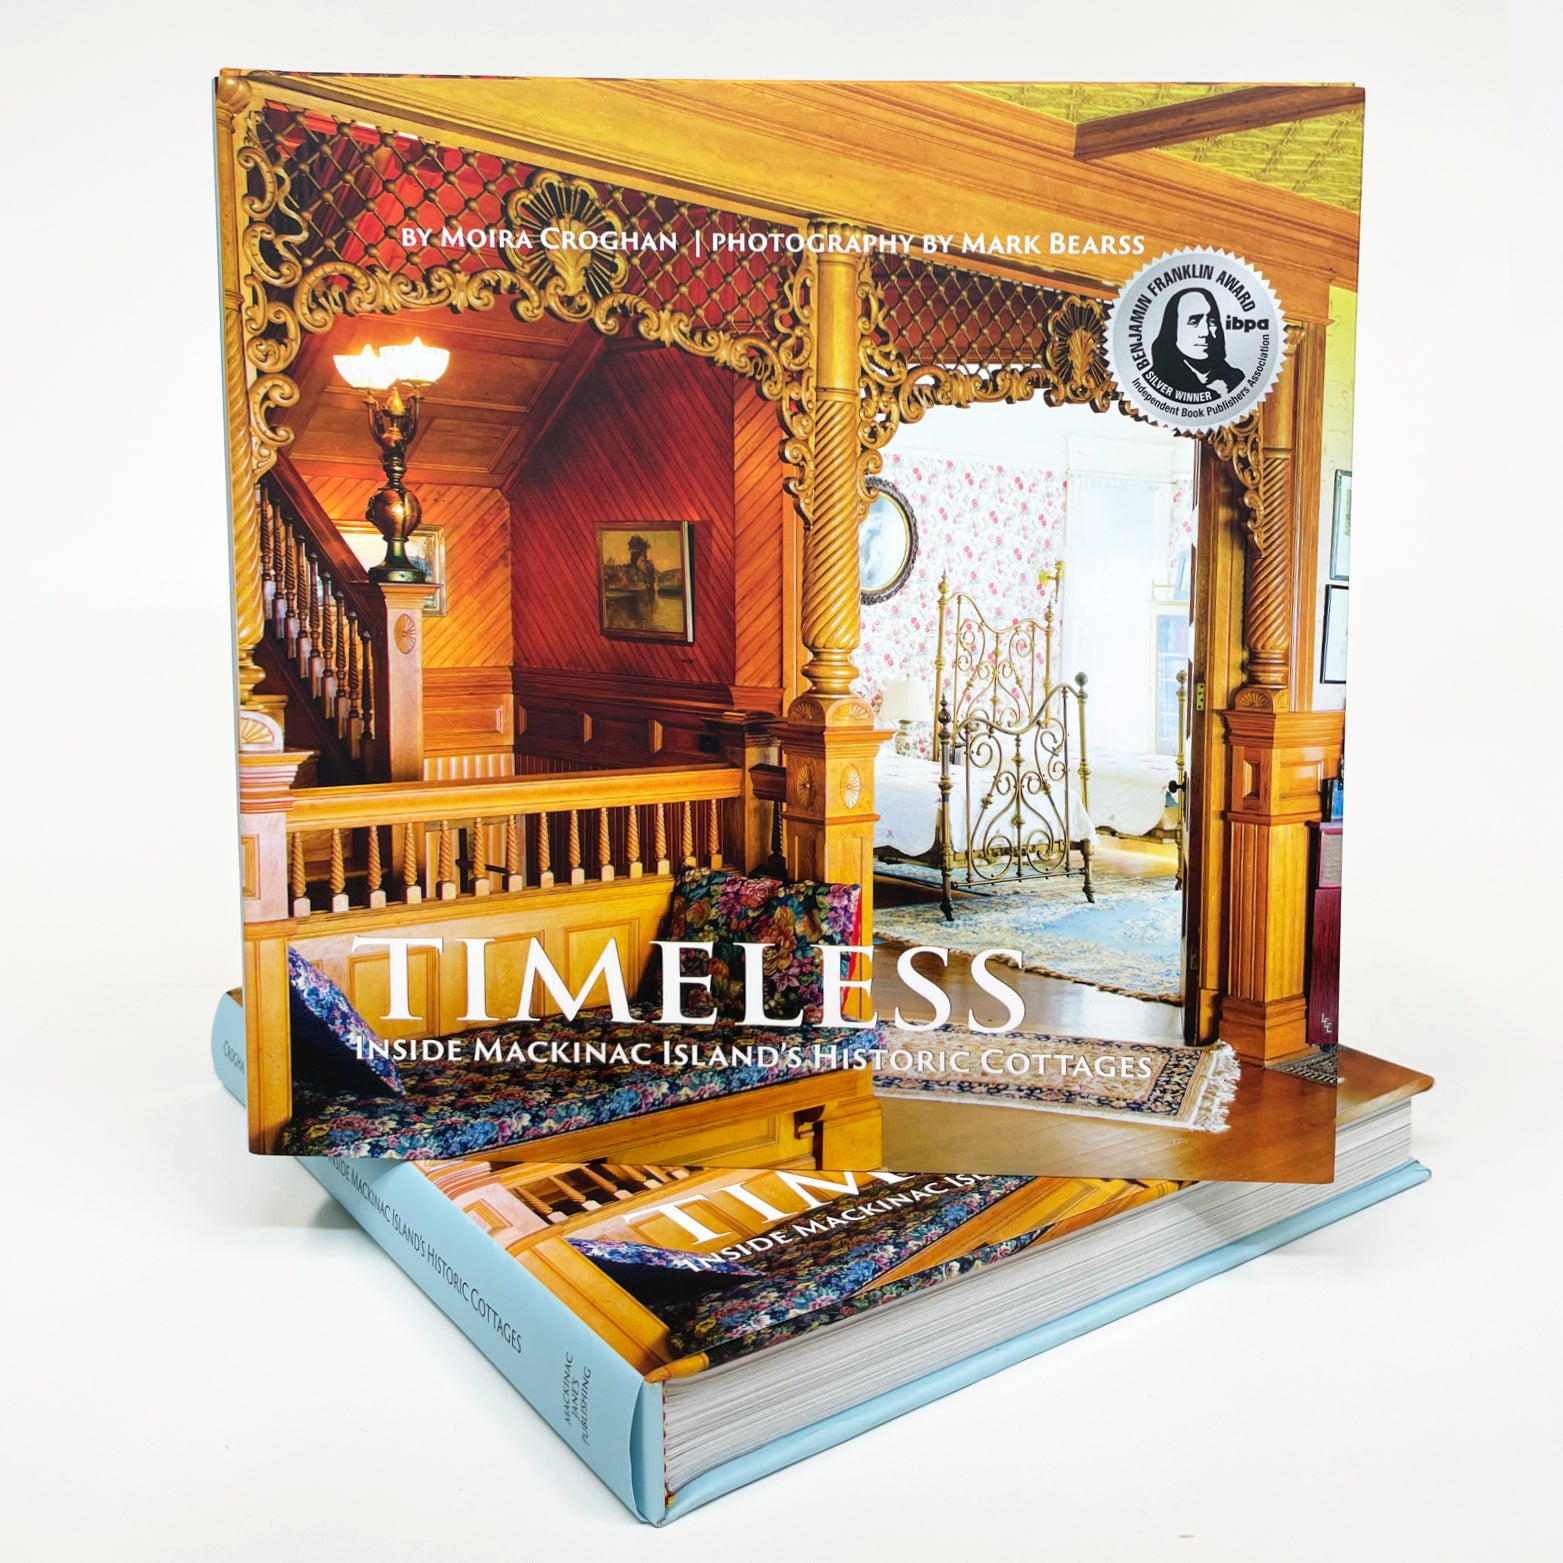 TIMELESS - Inside Mackinac Island's Historic Cottages  Text by Moira Croghan.   Photography by Mark Bearss. Published by Mackinac Memories.